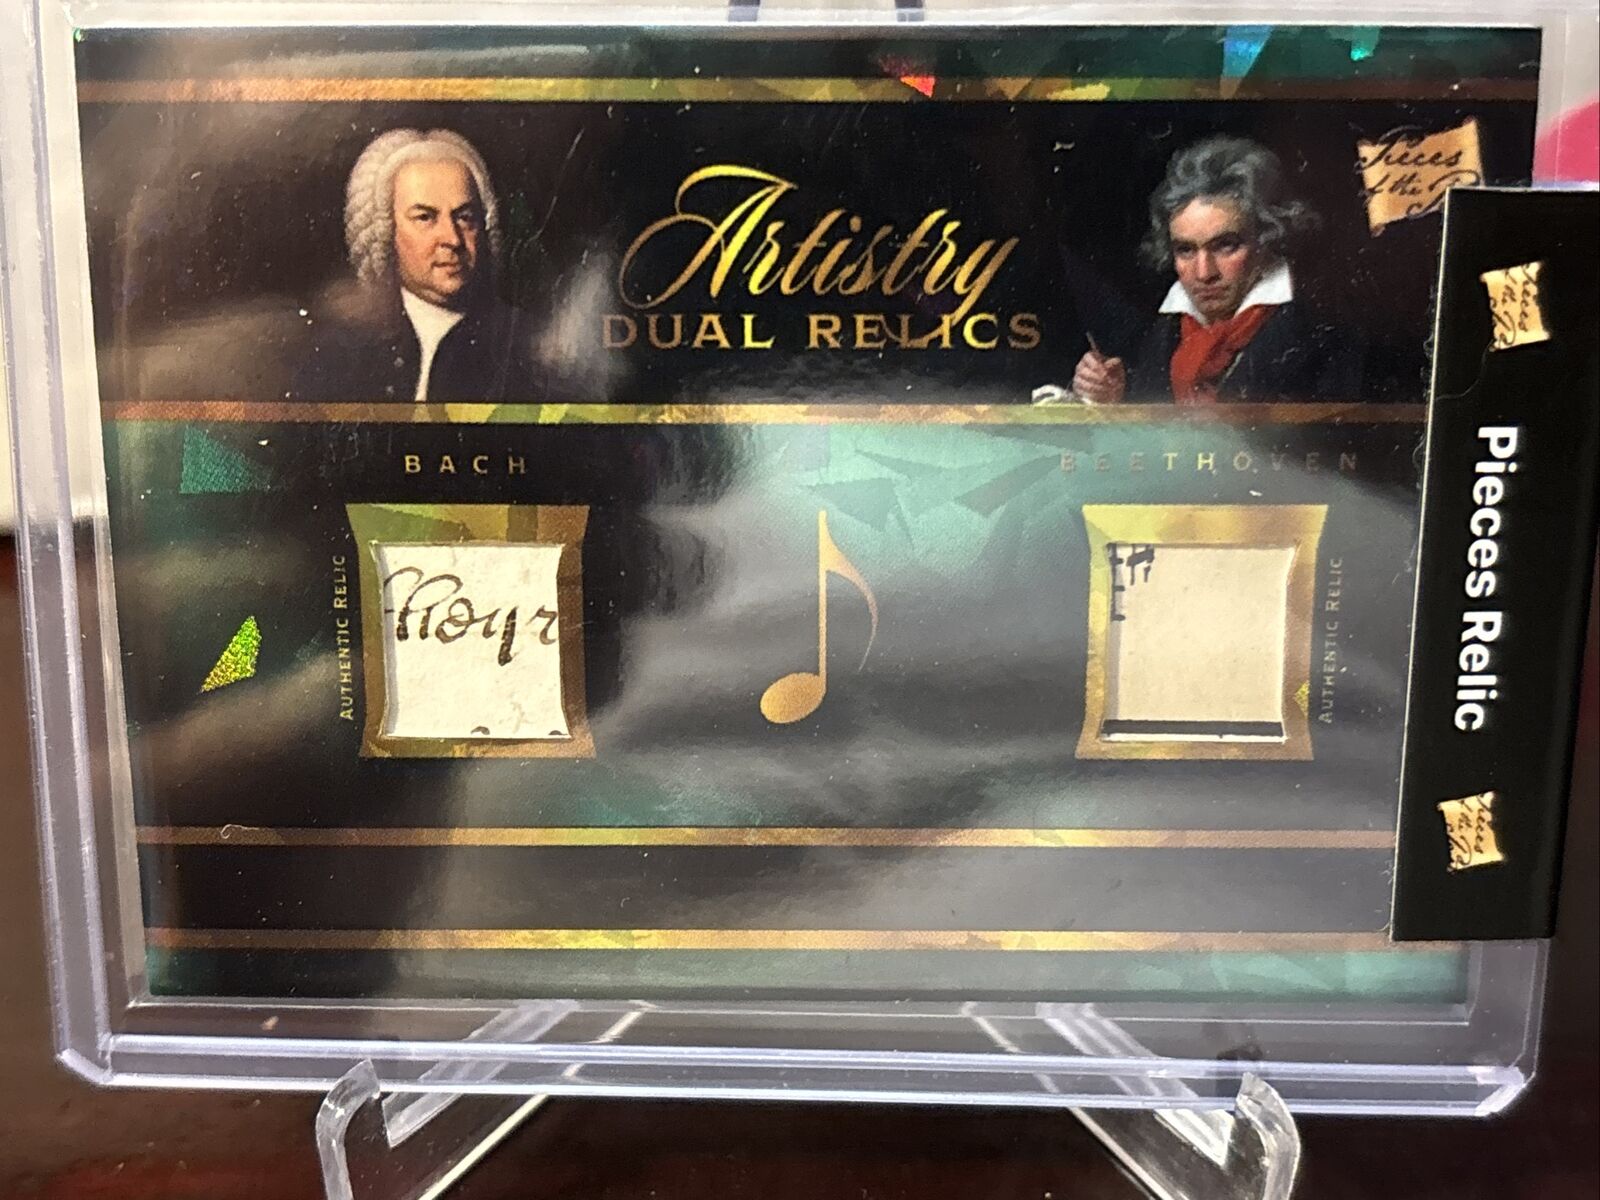 2023 SUPER BREAK PIECES OF THE PAST ART ARTISTRY DUAL RELICS BACH BEETHOVEN